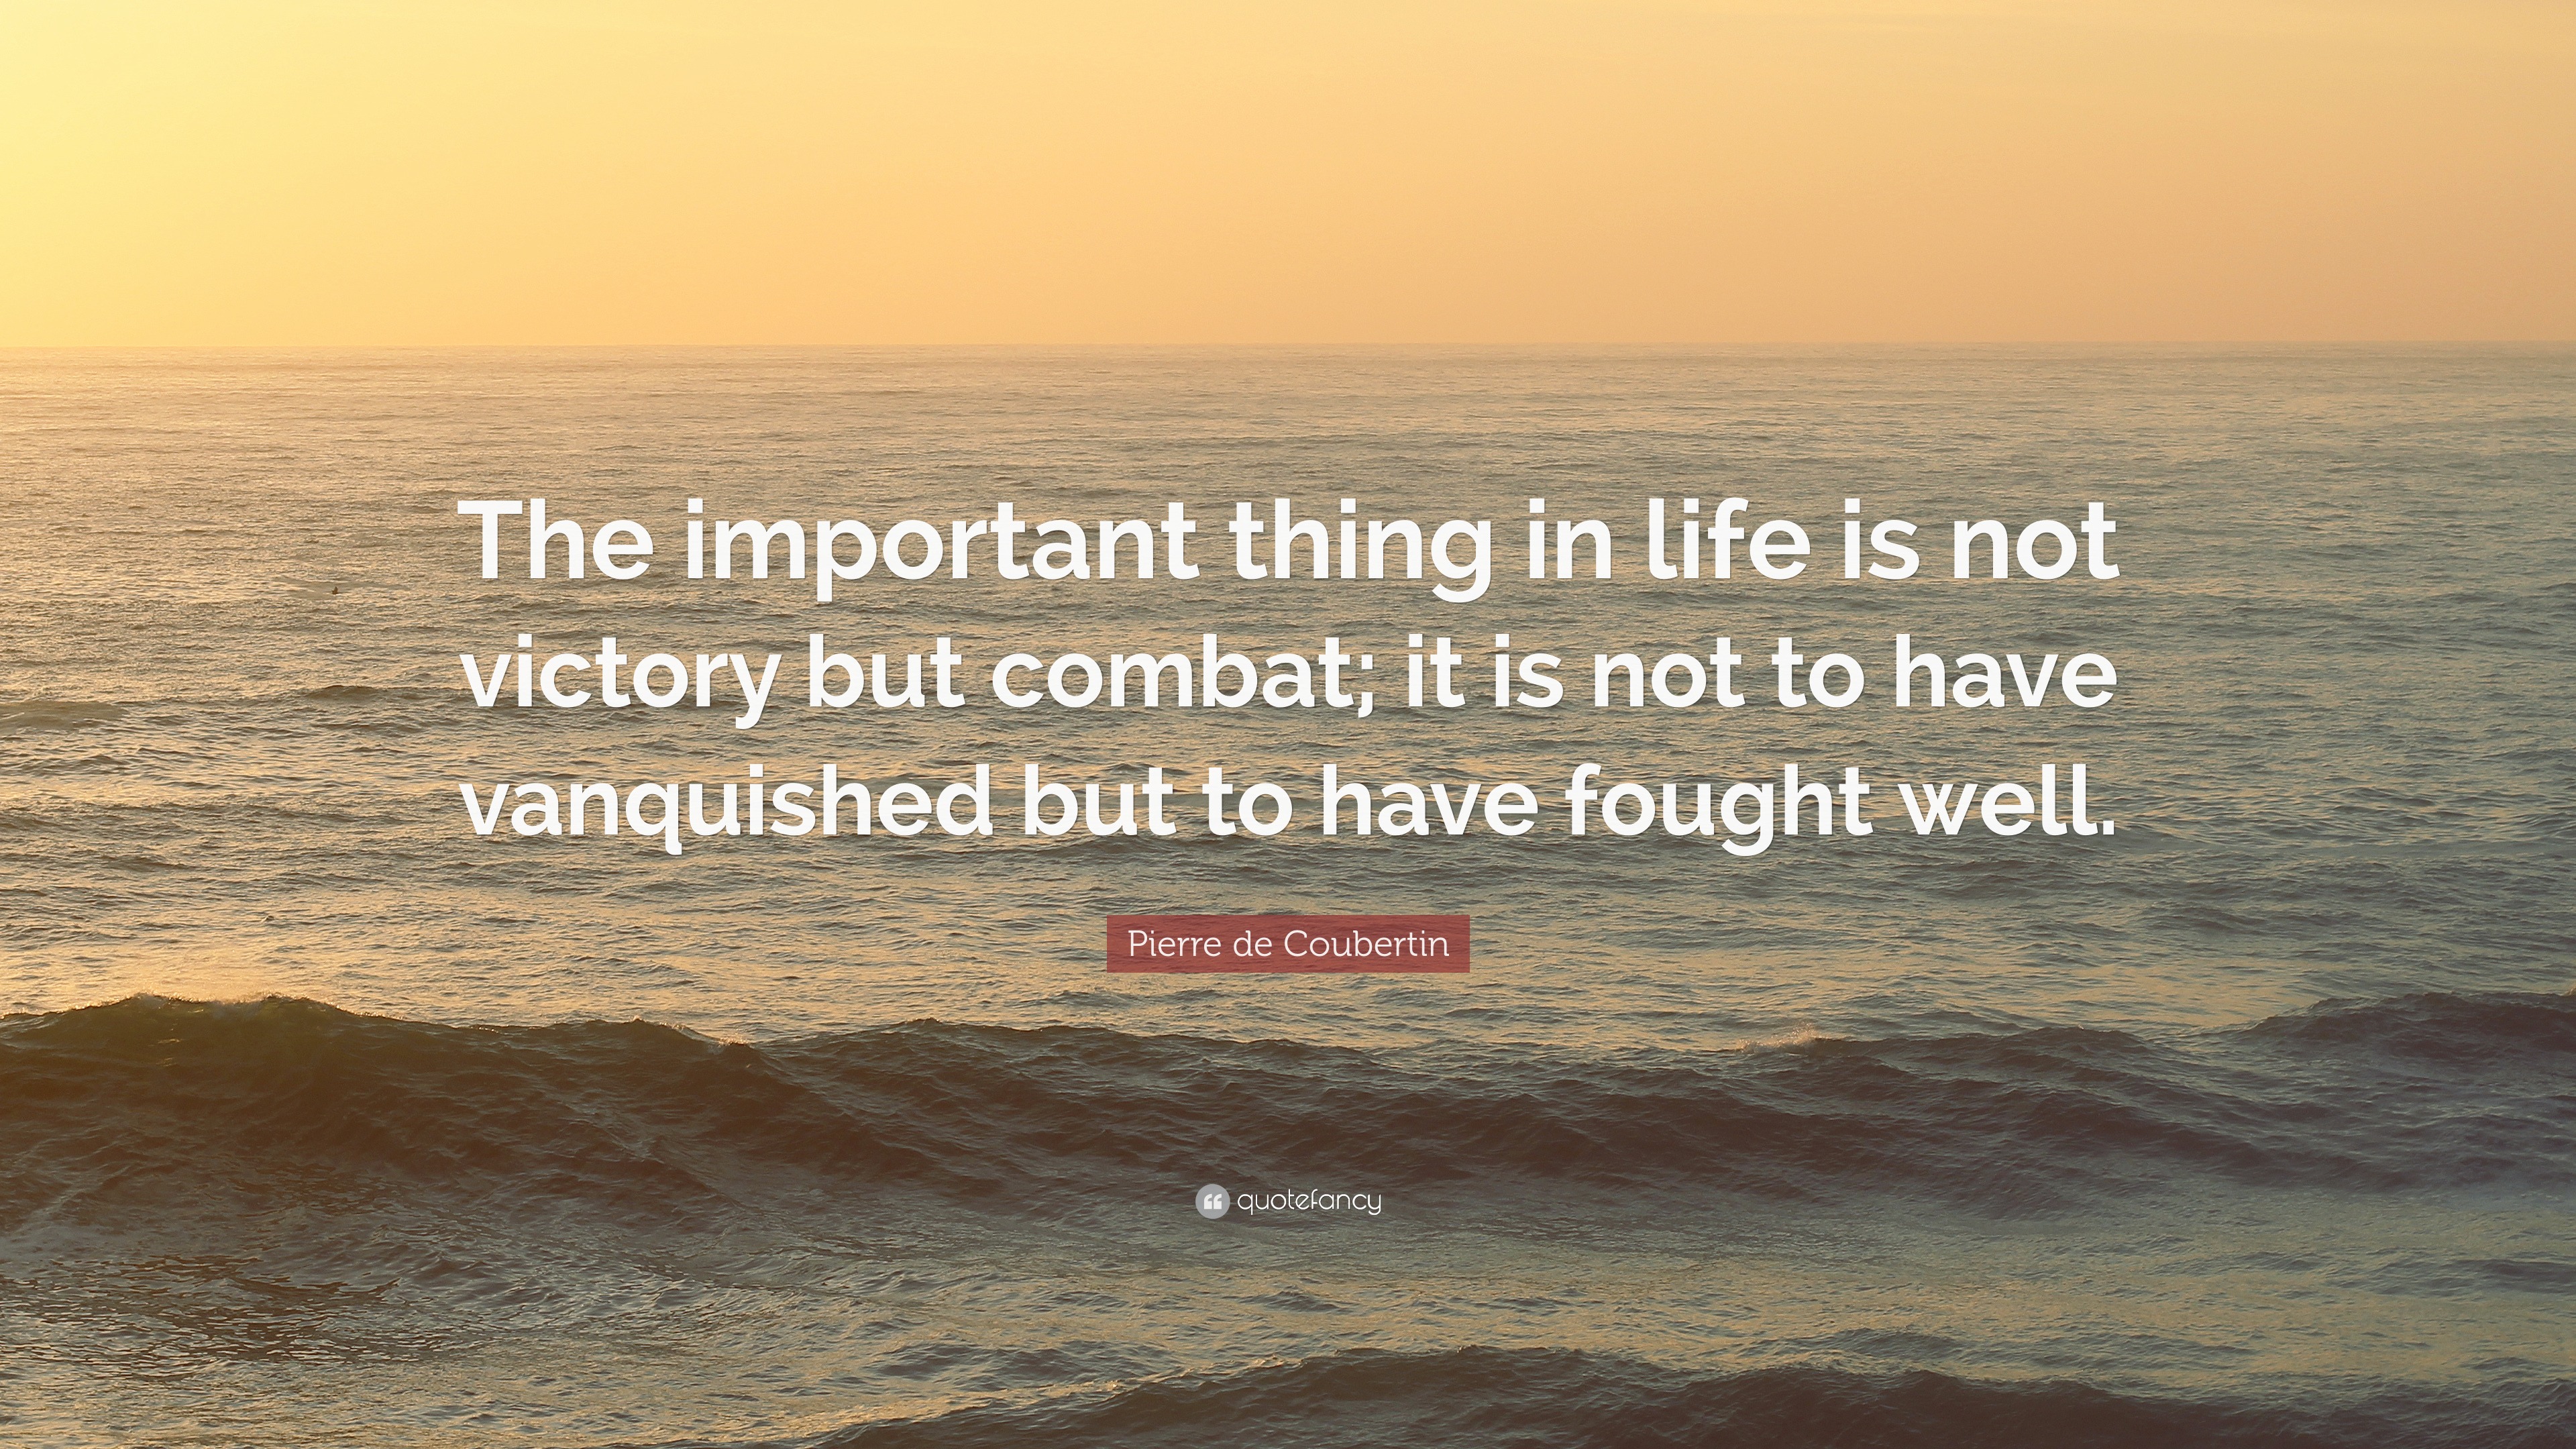 Pierre de Coubertin Quote “The important thing in life is not victory but bat